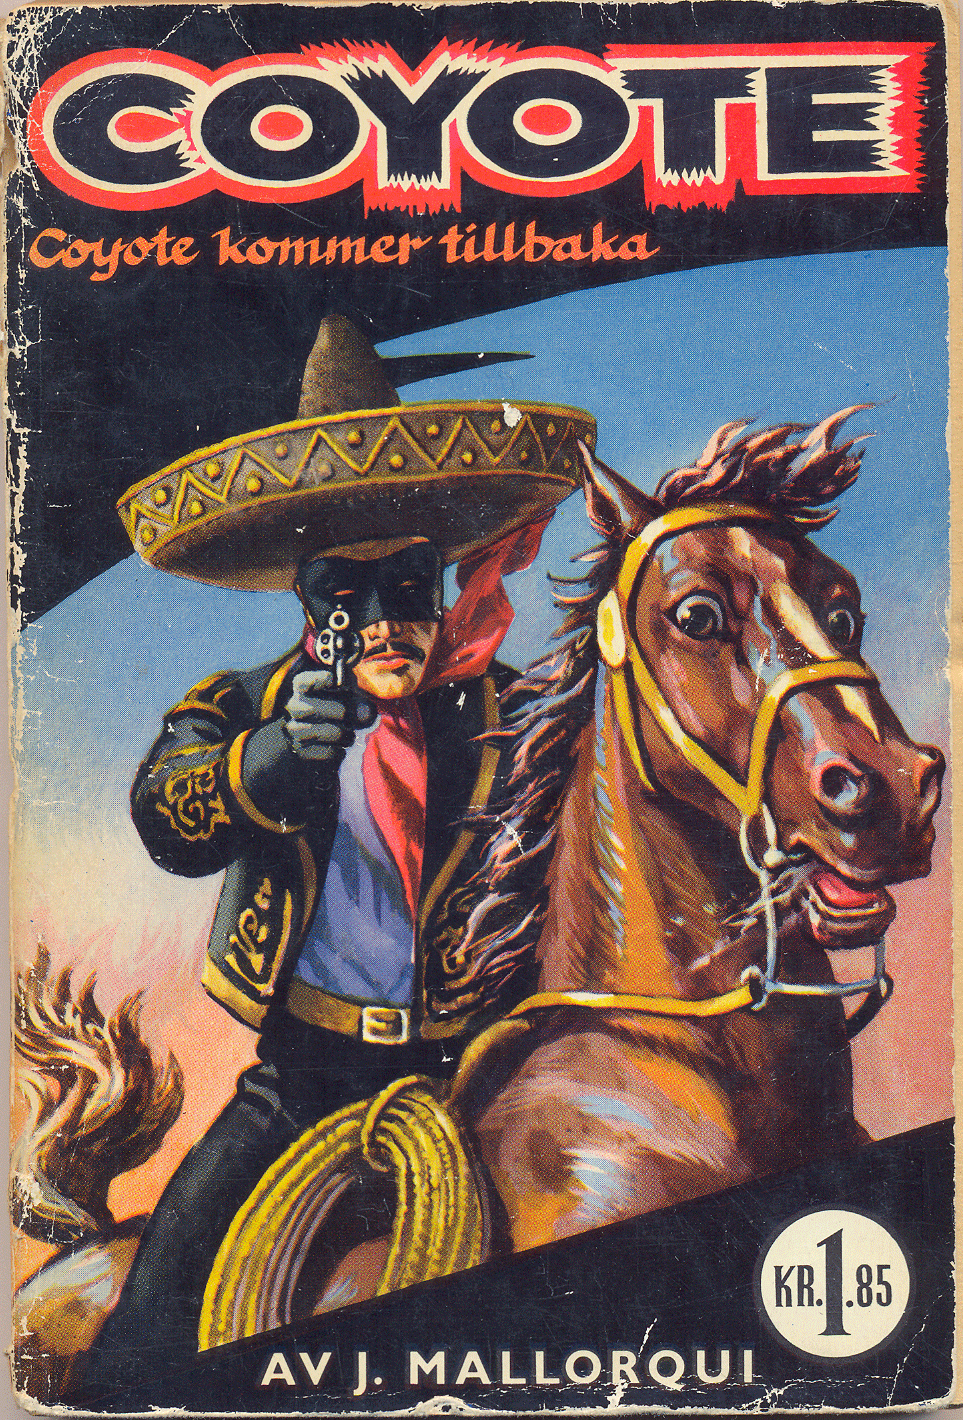 The Swedish "Coyote" - its the number 2 volume, "La vuelta del Coyote", published in Sweden in the mid-fifties.